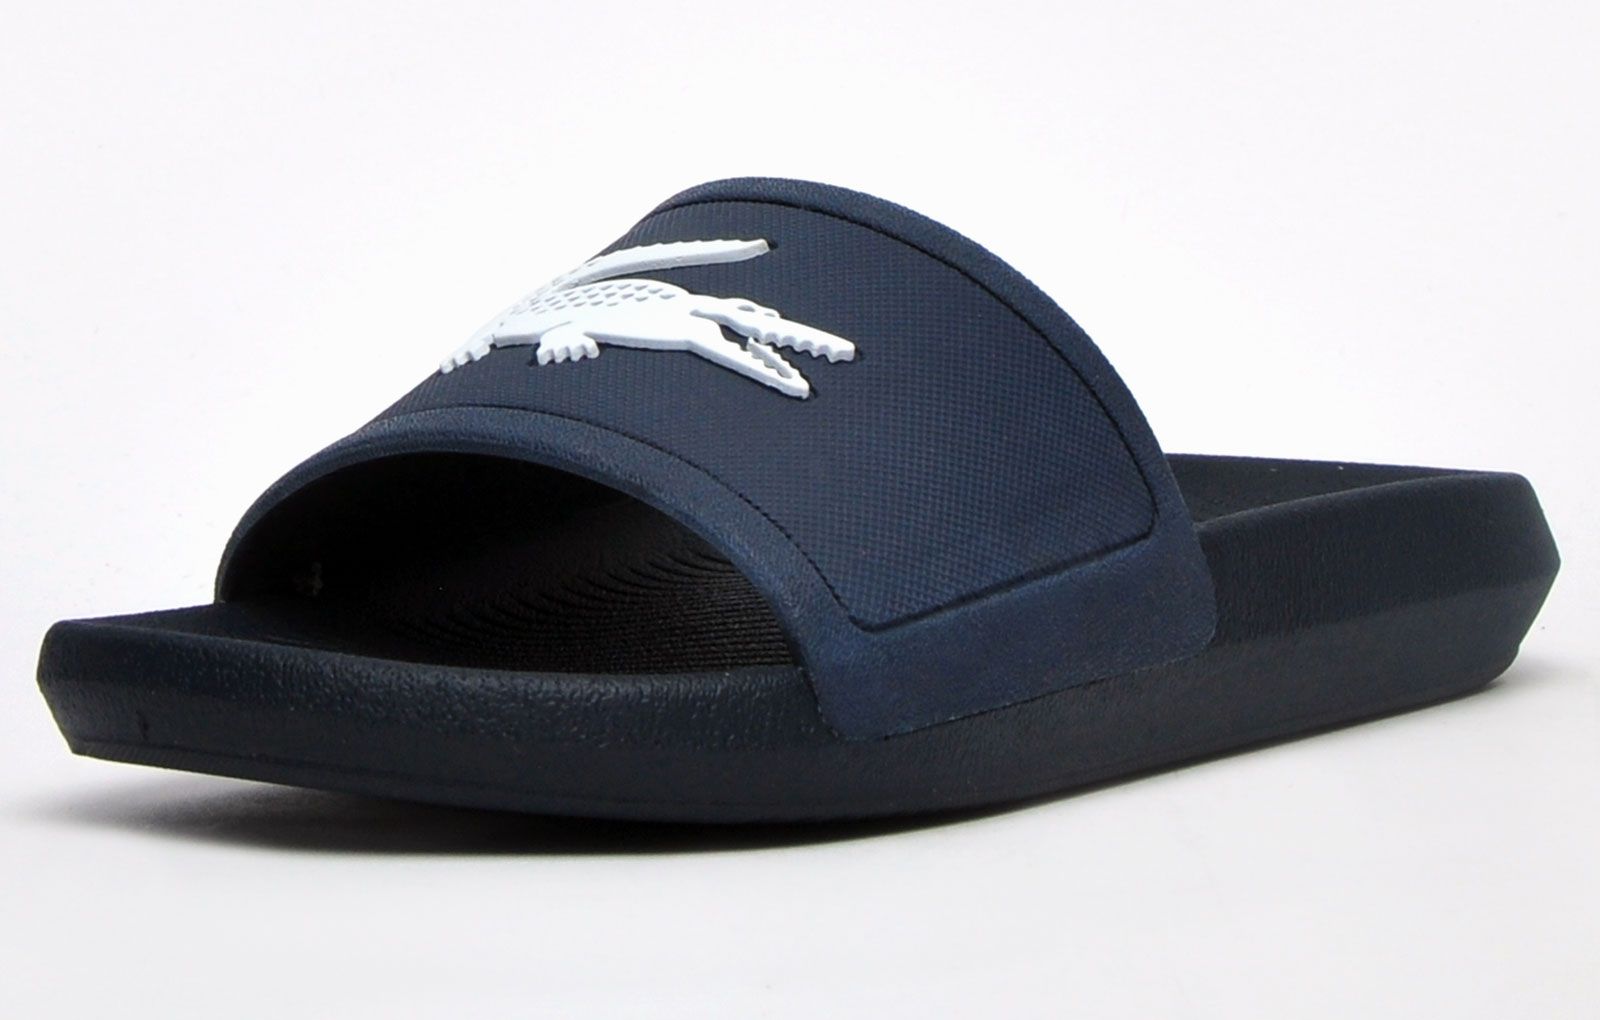 Head to the beach in style with these mens Lacoste Croco Slides. These on-trend sandals are crafted with comfort in mind whilst boasting a great water resistant super comfy footbed for a great fit and feel for the pool side and everyday wear. These designer slides are finished with eye catching Lacoste branding throughout just in case you want a sign of approval that youre wearing cool chic style this summer season
 
 - On trend synthetic upper
 - Comfort moulded footbed
 - Grippy outsole
 - Slip on wear
 - Iconic Lacoste branding throughout
 Please Note: These slides are supplied poly bagged (without box)
 These Lacoste Slides are sold as B grades which means there may be some very slight cosmetic issues on the shoe and they come in a poly bag. There could be occasional issues with wrong swing tags being allocated to wrong shoes by Lacoste themselves which could result in some size confusion but you must take the size IN THE SHOE as the size that the shoe actually is ( not what is on the tag ). We have checked most of the shoes and in our opinion,all are practically perfect without any blemishes on them at all and in essence if the shoes did not have the letter B denoted on the swing tag you would presume these were perfect shoes. All shoes are guaranteed against fair wear and tear and offer a substantial saving against the normal high street price. The overall function or performance of the shoe will not be affected by any minor cosmetic issues. B Grades are original authentic products released by the brand manufacturer with their approval at greatly reduced prices. If you are unhappy with your purchase, we will be more than happy to take the shoes back from you and issue a full refund